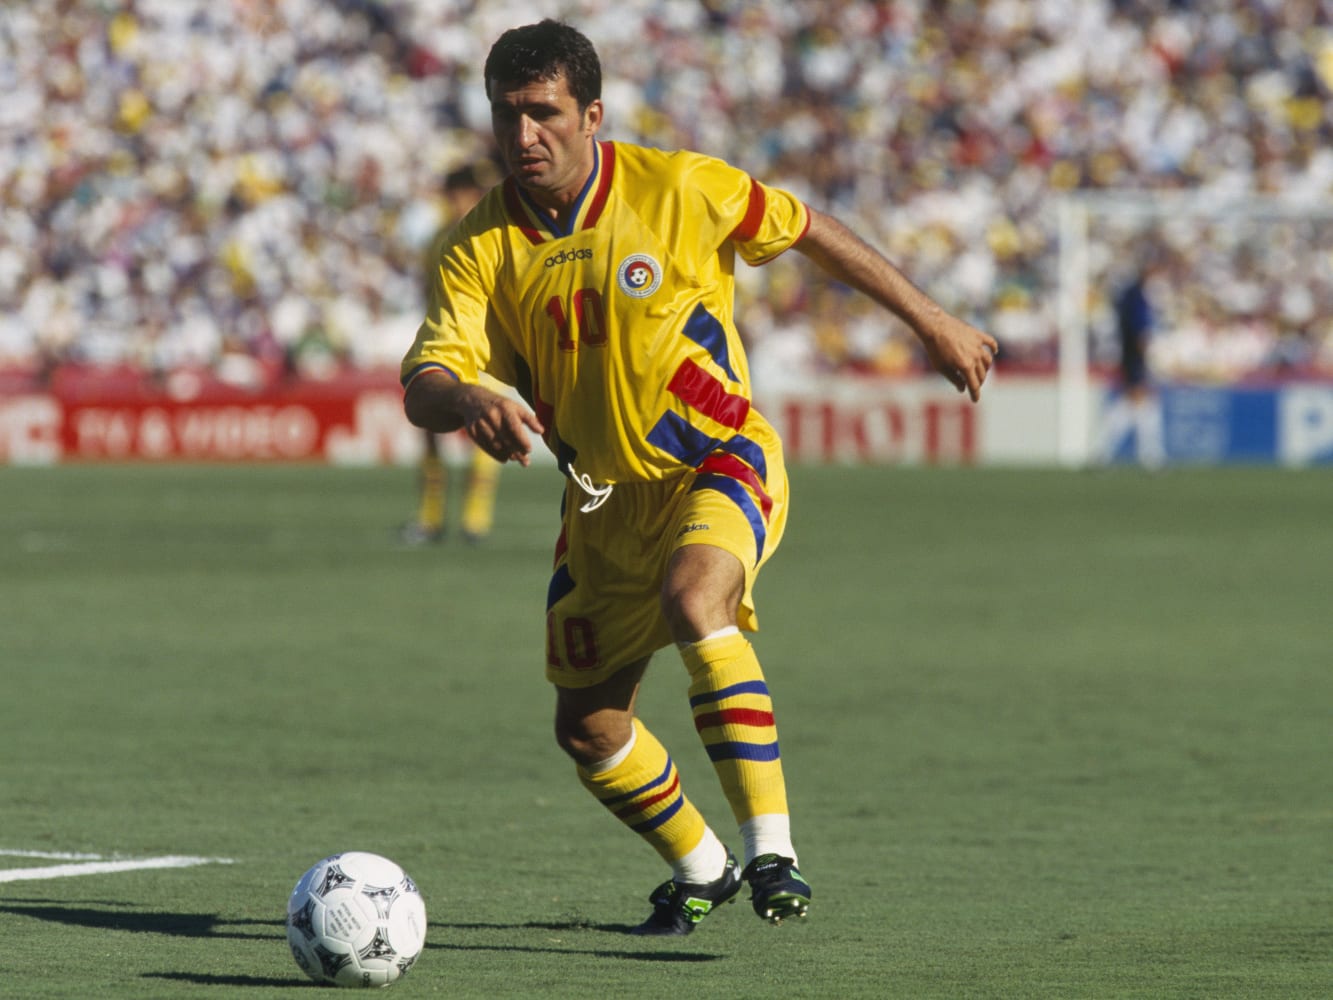 Why Gheorghe Hagi is a footballing icon